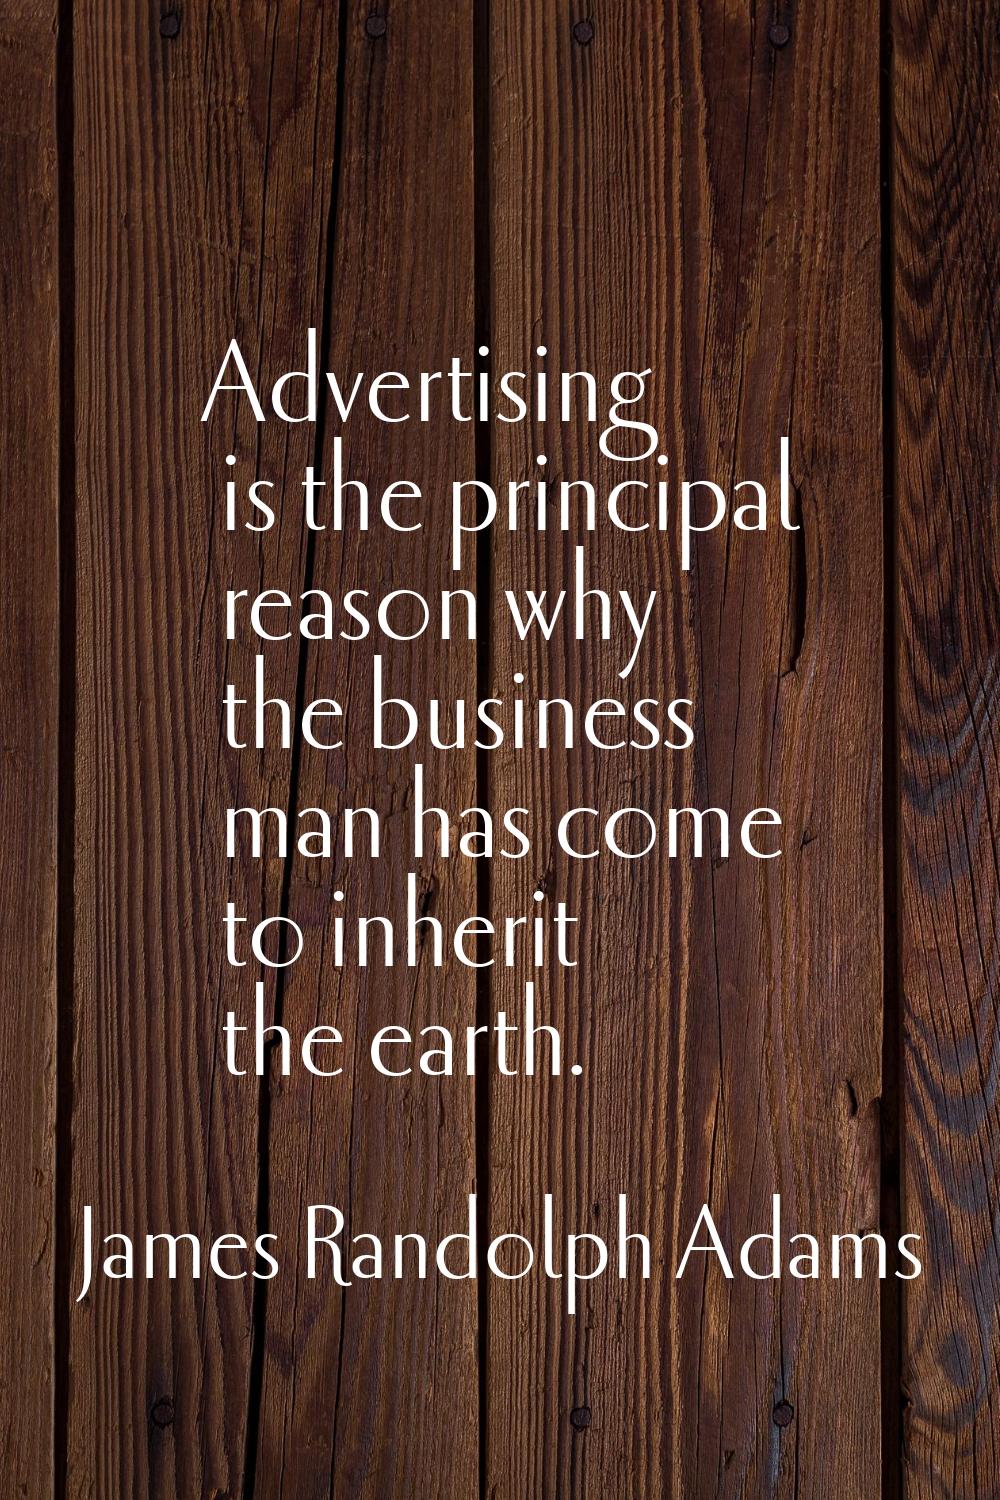 Advertising is the principal reason why the business man has come to inherit the earth.